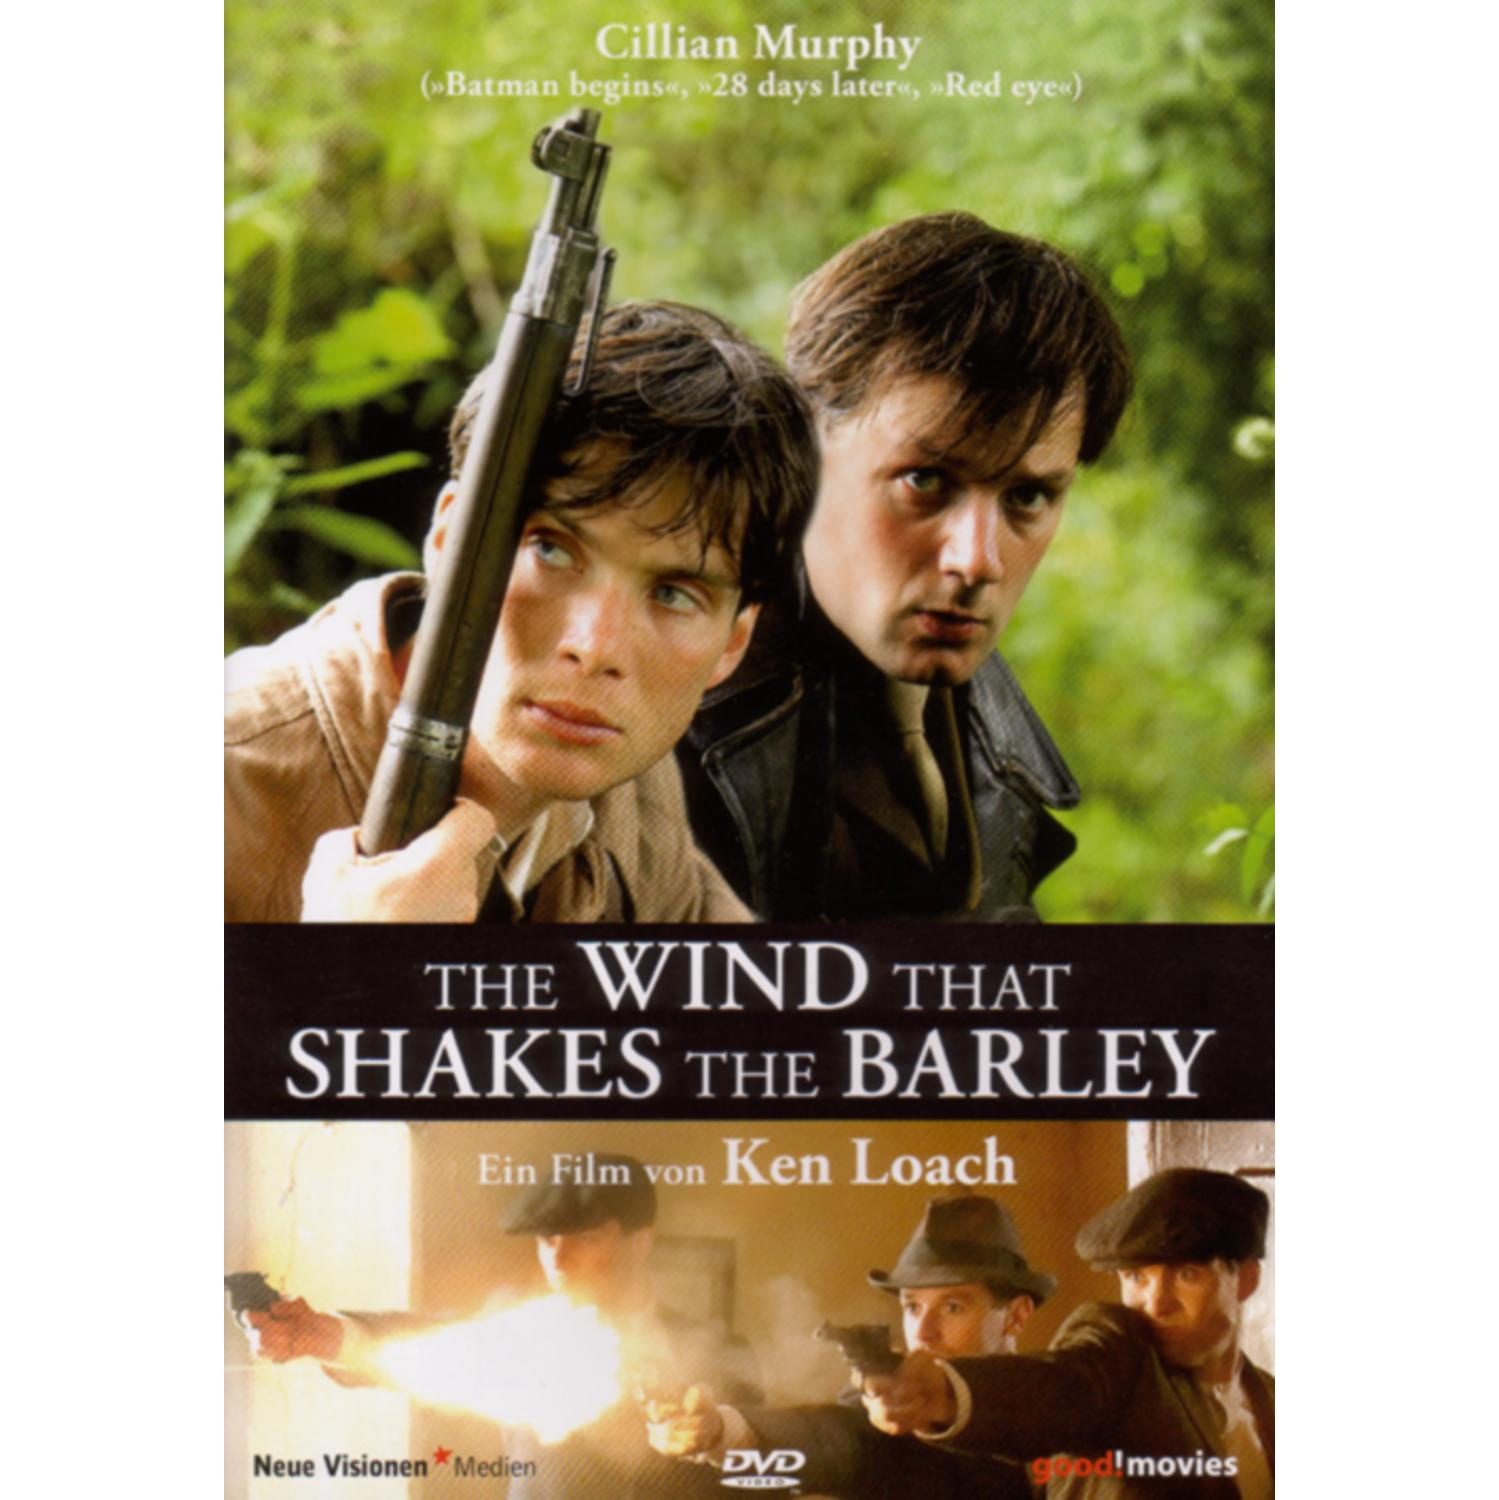 The Wind Barley that DVD Shakes the